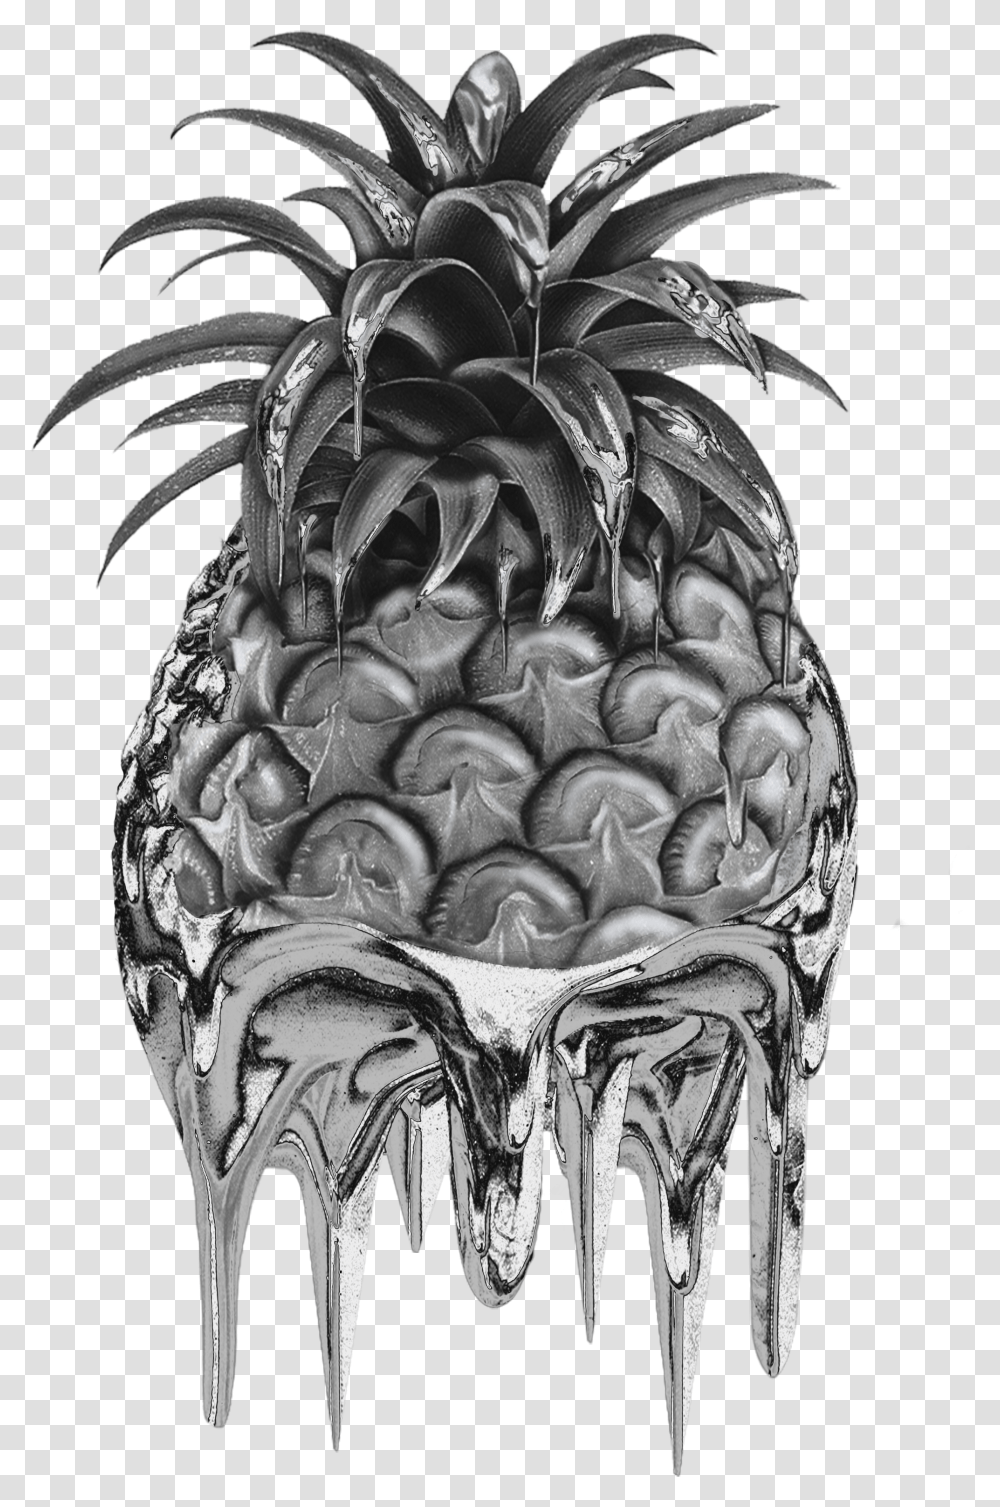 Stay Gold Silver Chrome Drip Pineapple Fruits, Plant, Food, Tattoo, Skin Transparent Png